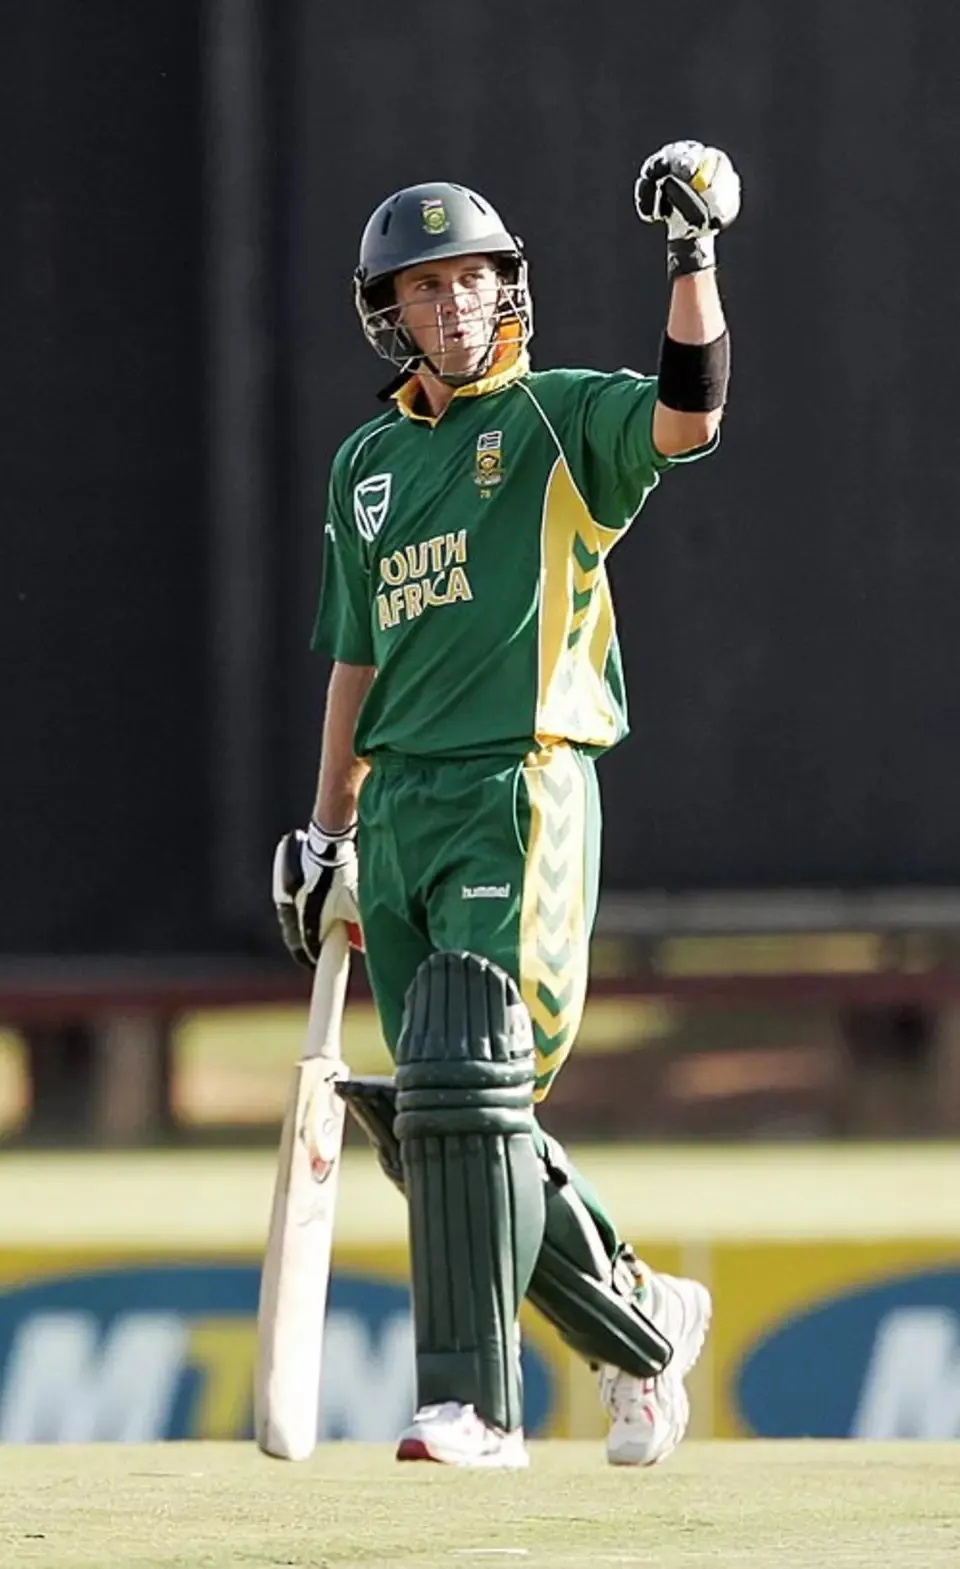 AB de Villiers sealed a nine-wicket win during the 2006 SA vs IND 5th ODI  Image - AFP